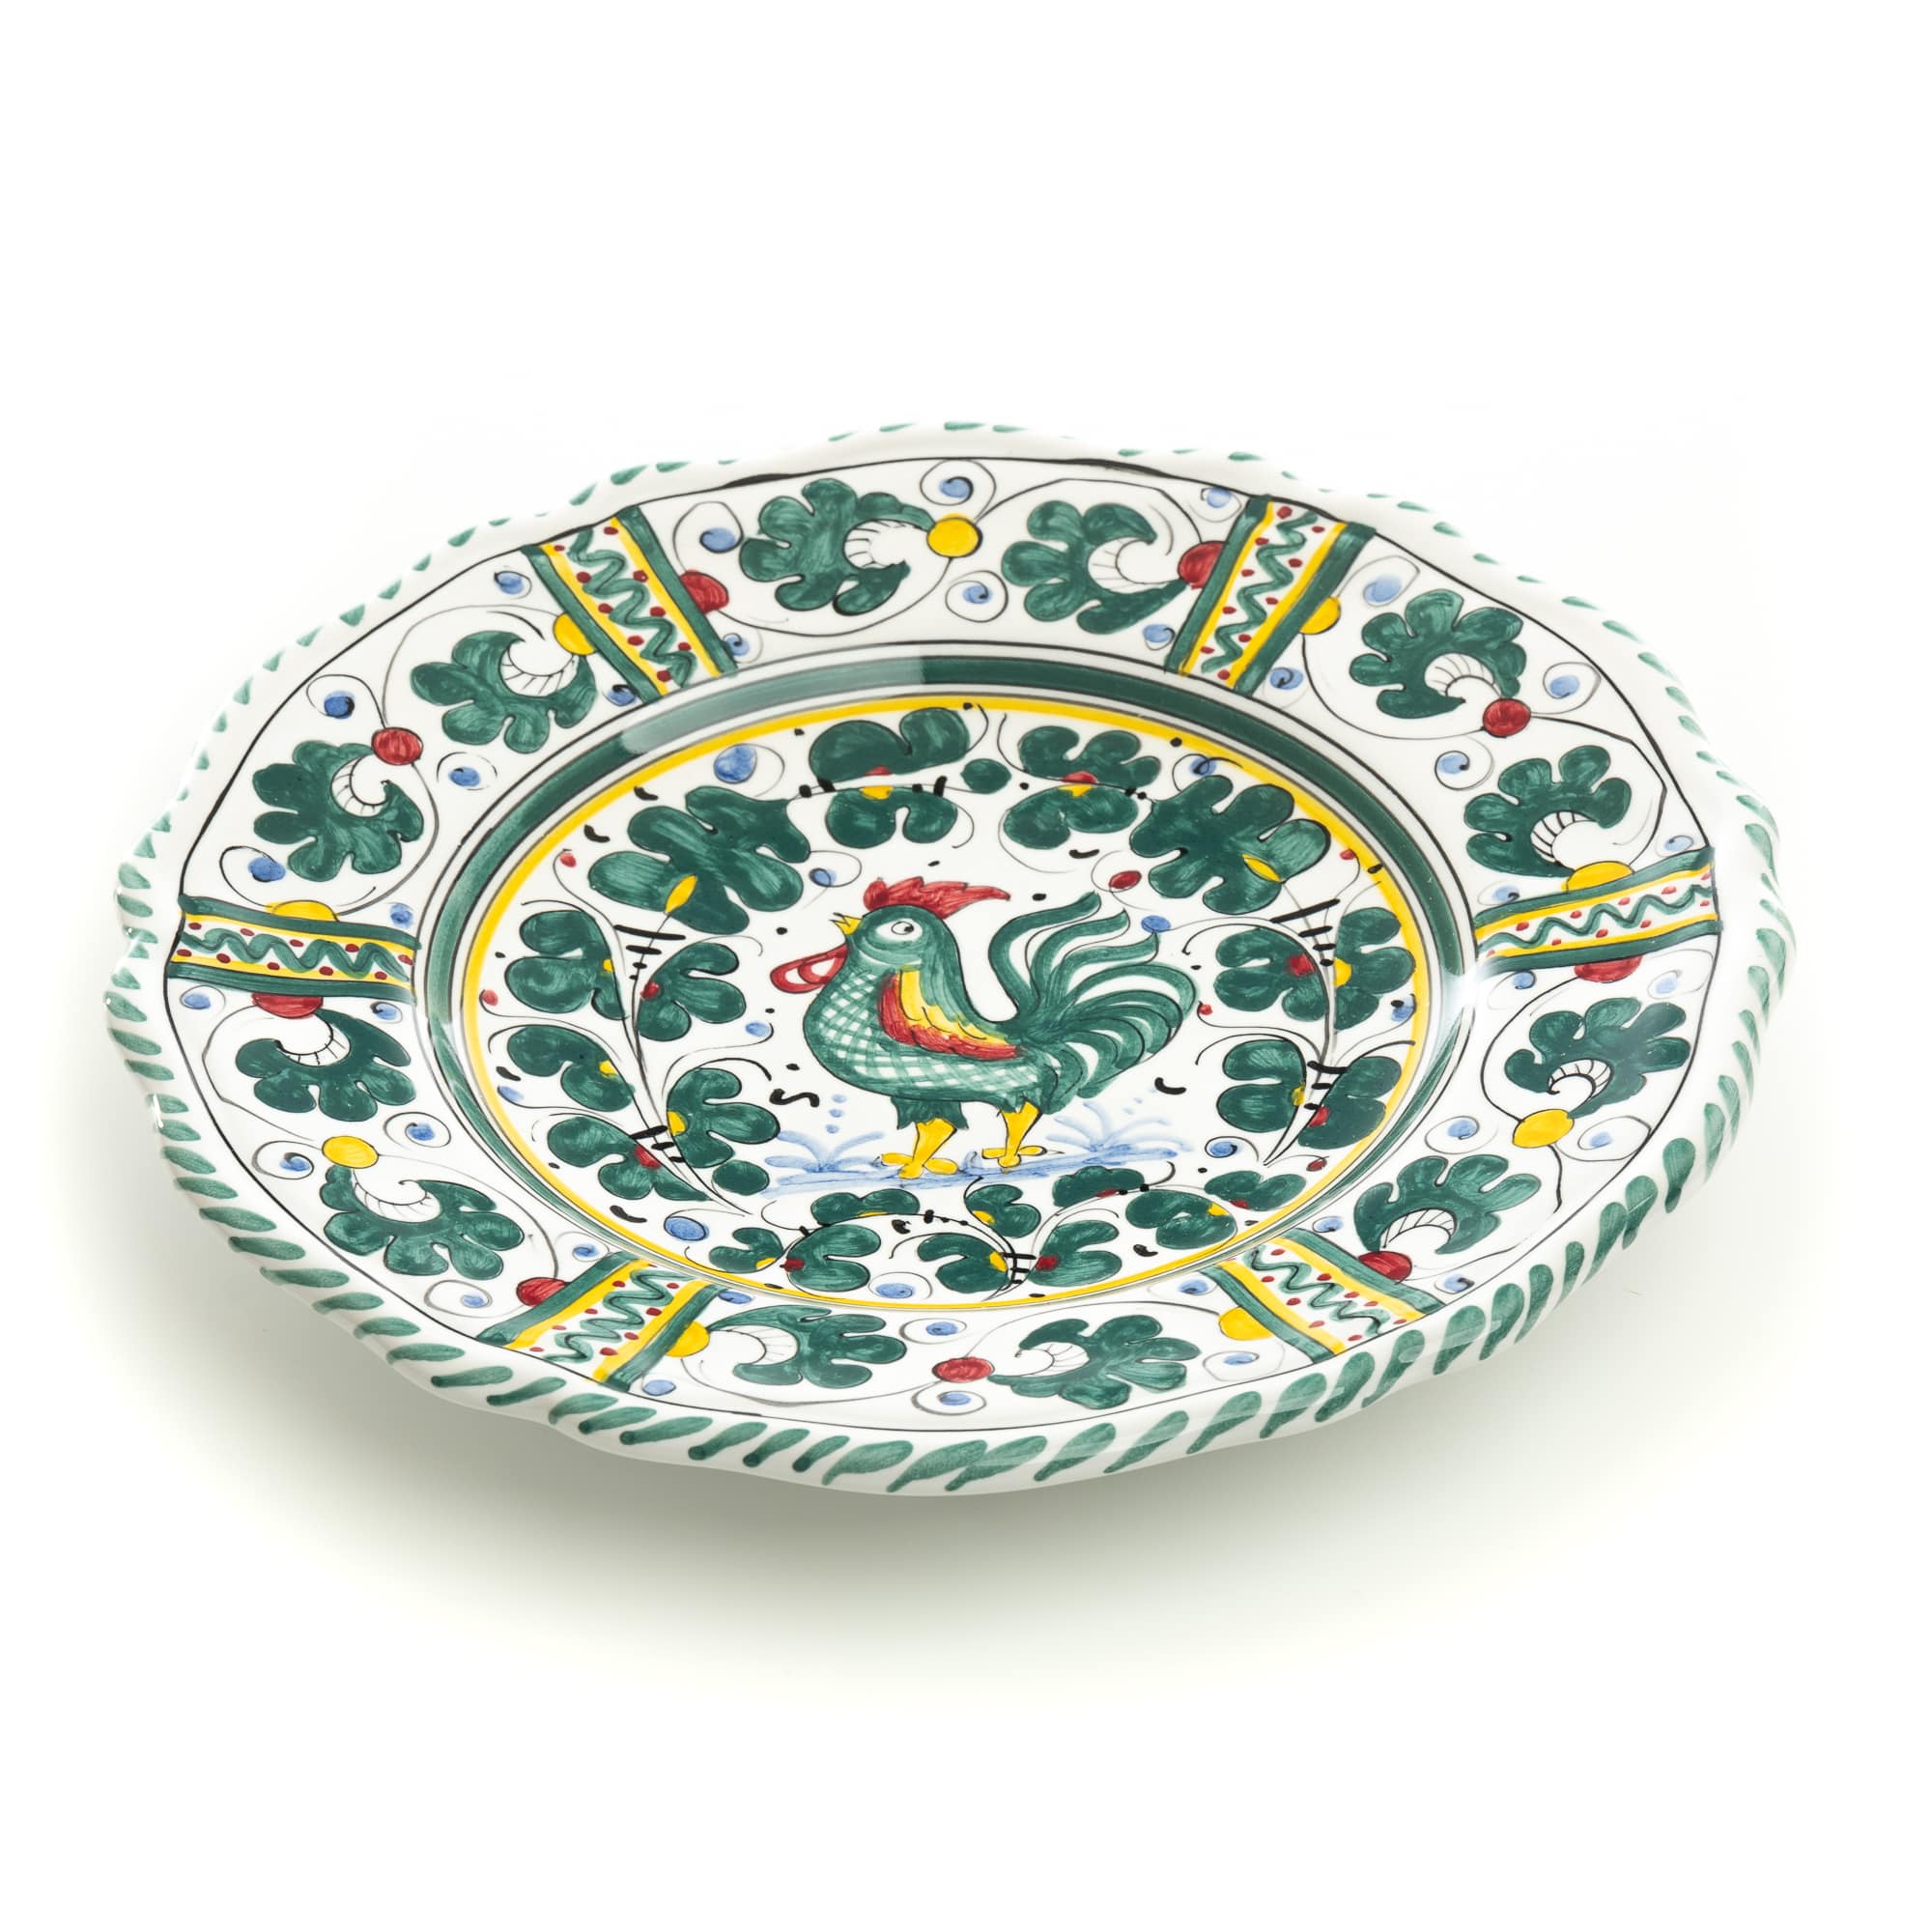 Orvieto Salad Plate, Full Design - Set of 4, ceramics, pottery, italian design, majolica, handmade, handcrafted, handpainted, home decor, kitchen art, home goods, deruta, majolica, Artisan, treasures, traditional art, modern art, gift ideas, style, SF, shop small business, artists, shop online, landmark store, legacy, one of a kind, limited edition, gift guide, gift shop, retail shop, decorations, shopping, italy, home staging, home decorating, home interiors